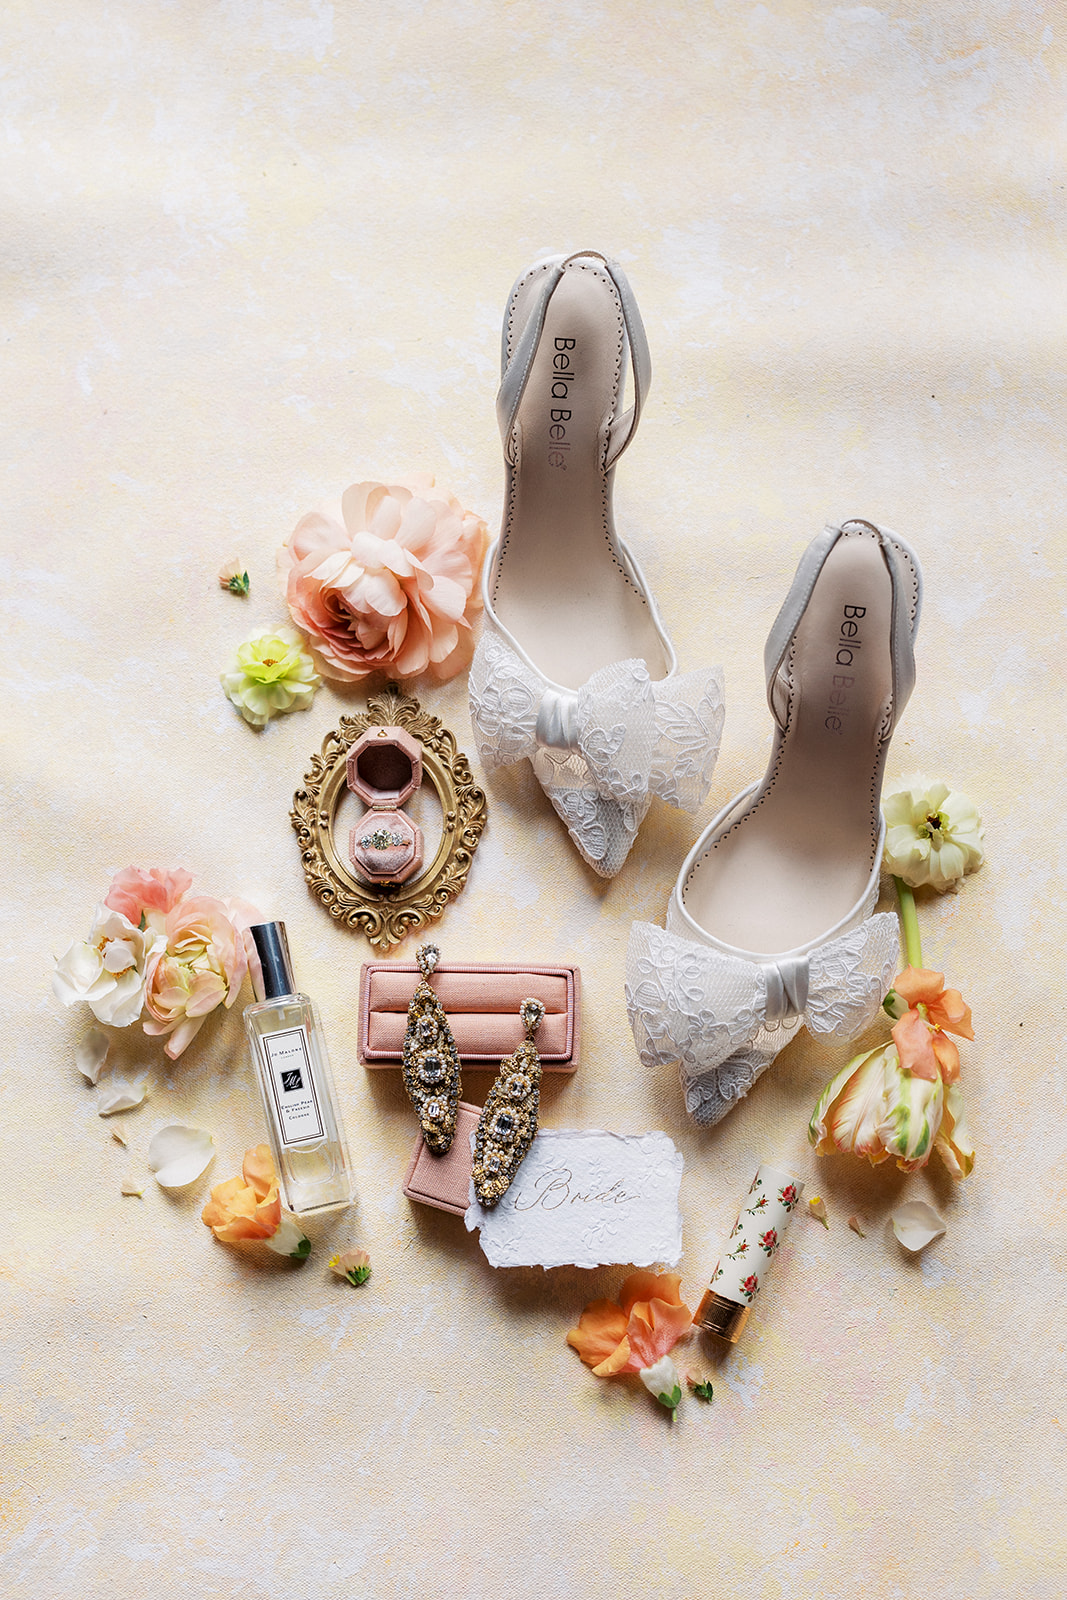 Bridal details sit on a white table